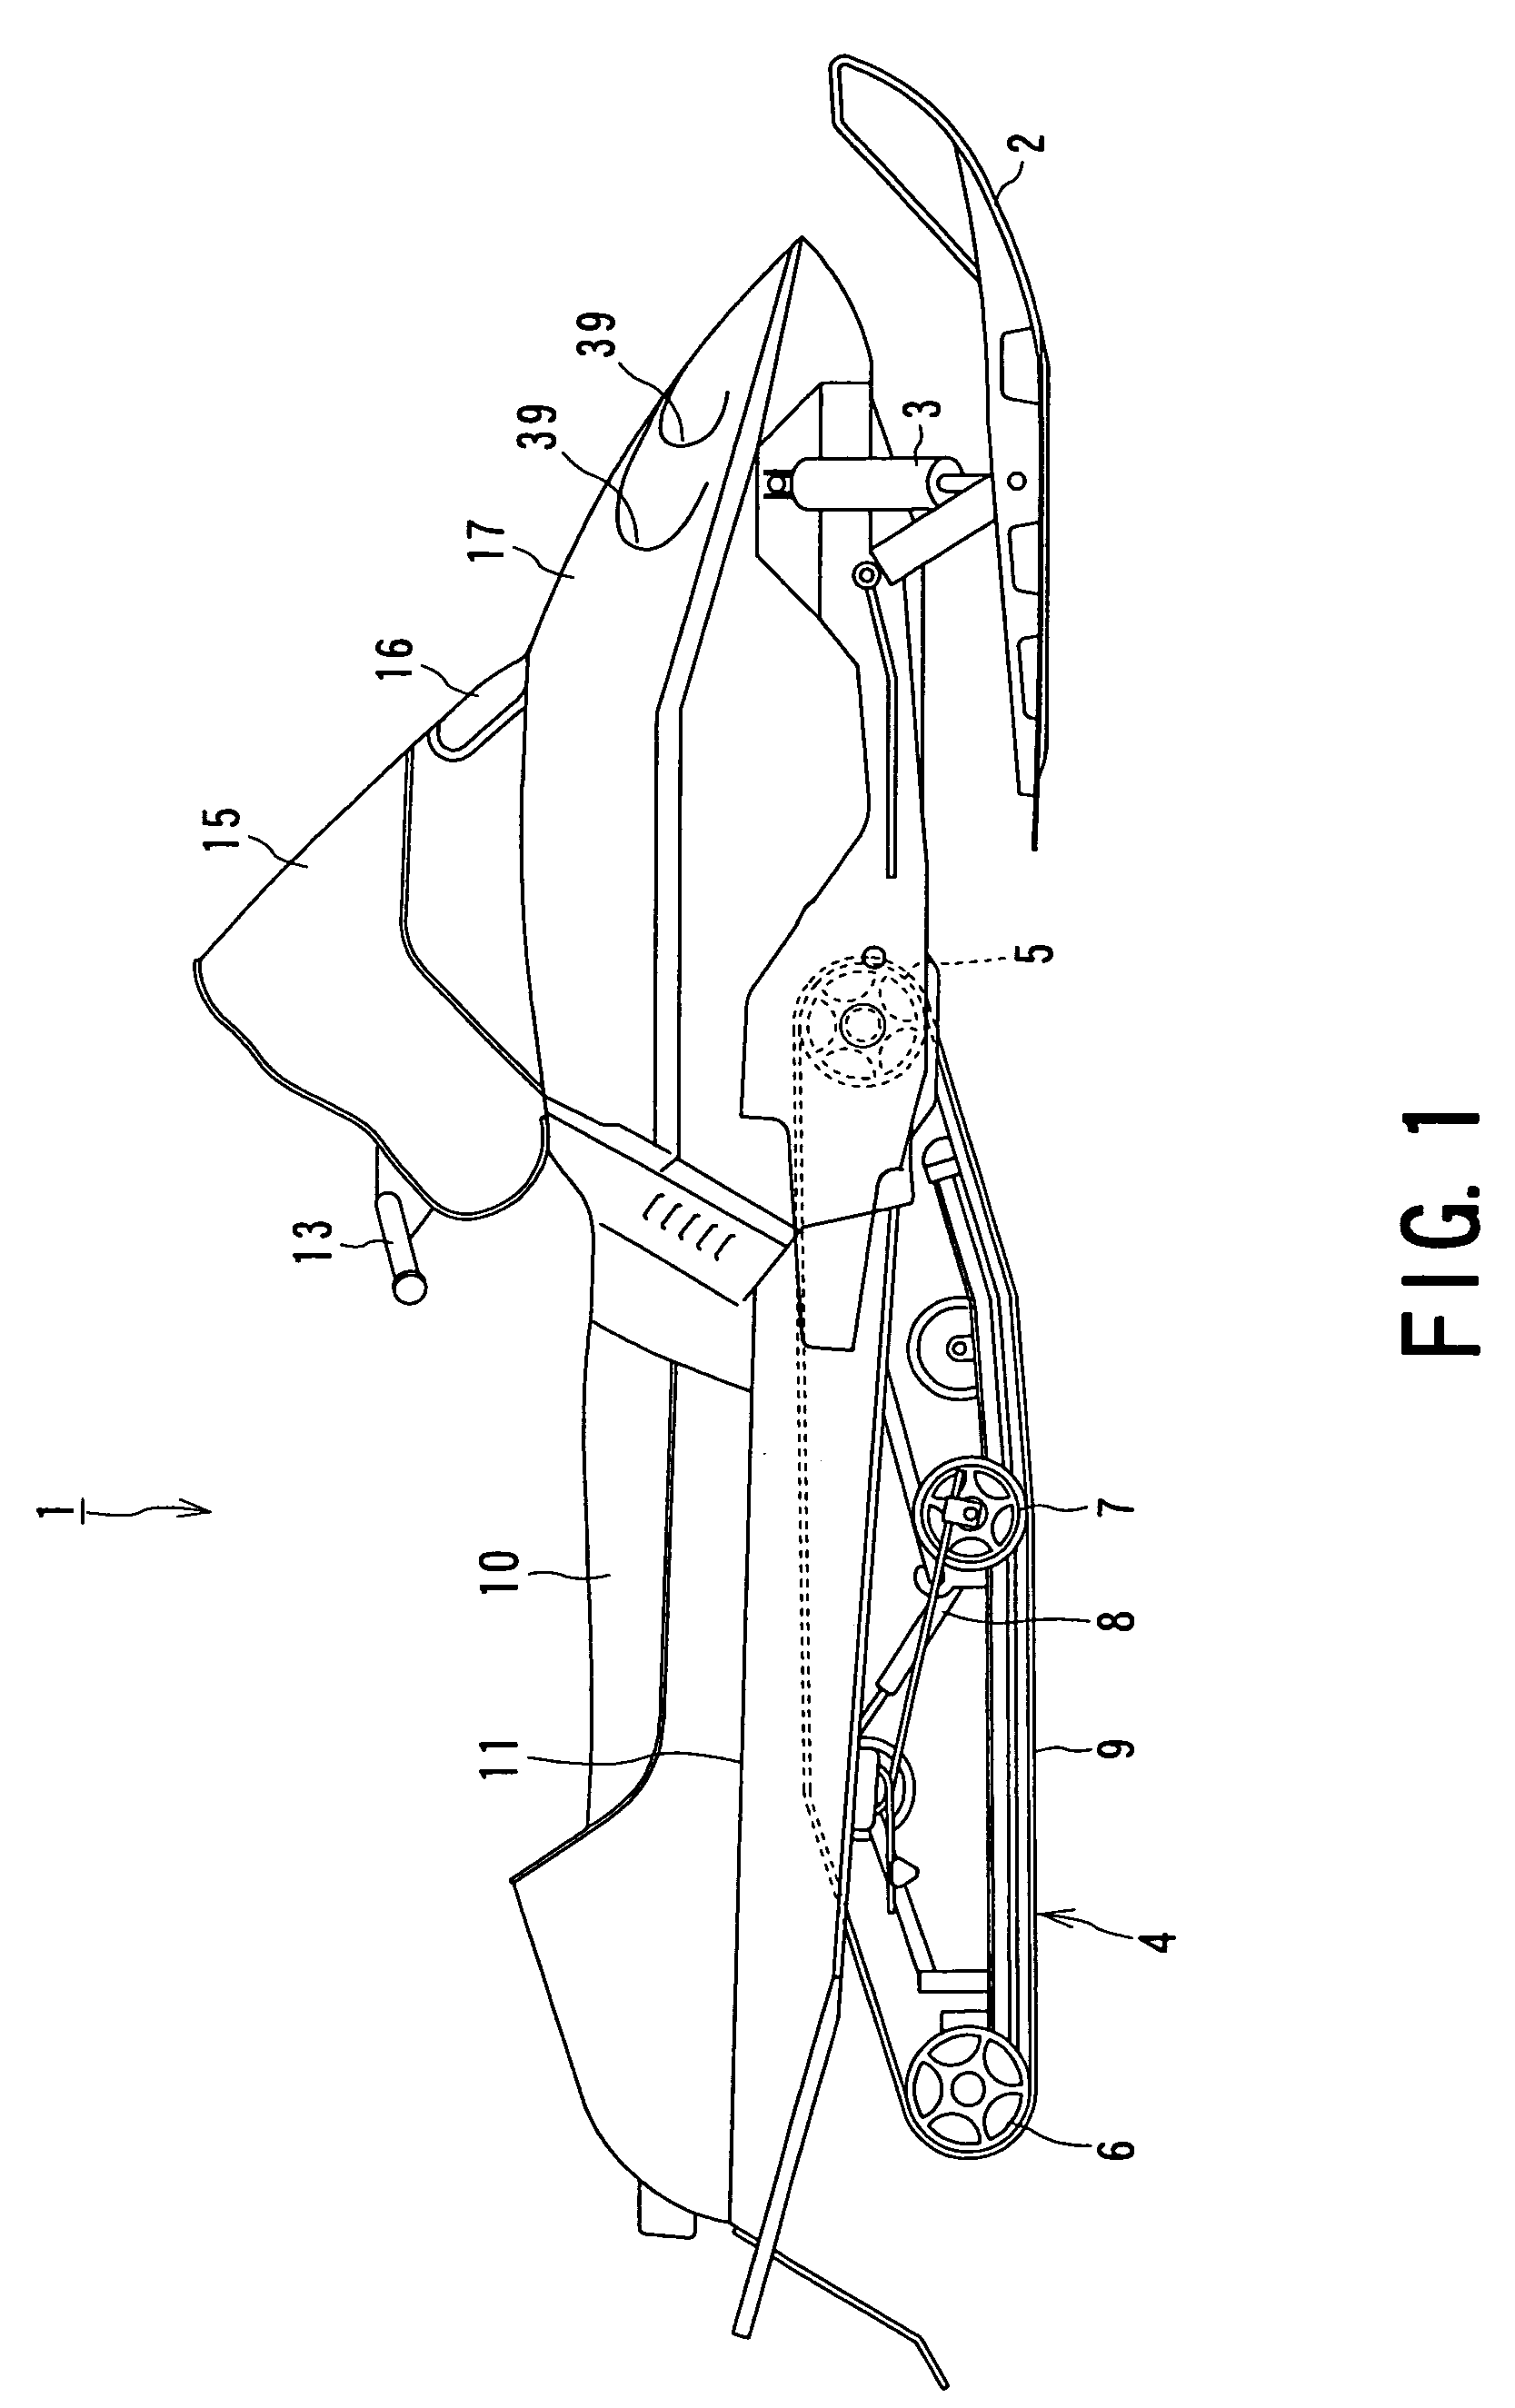 Engine structure of snowmobile